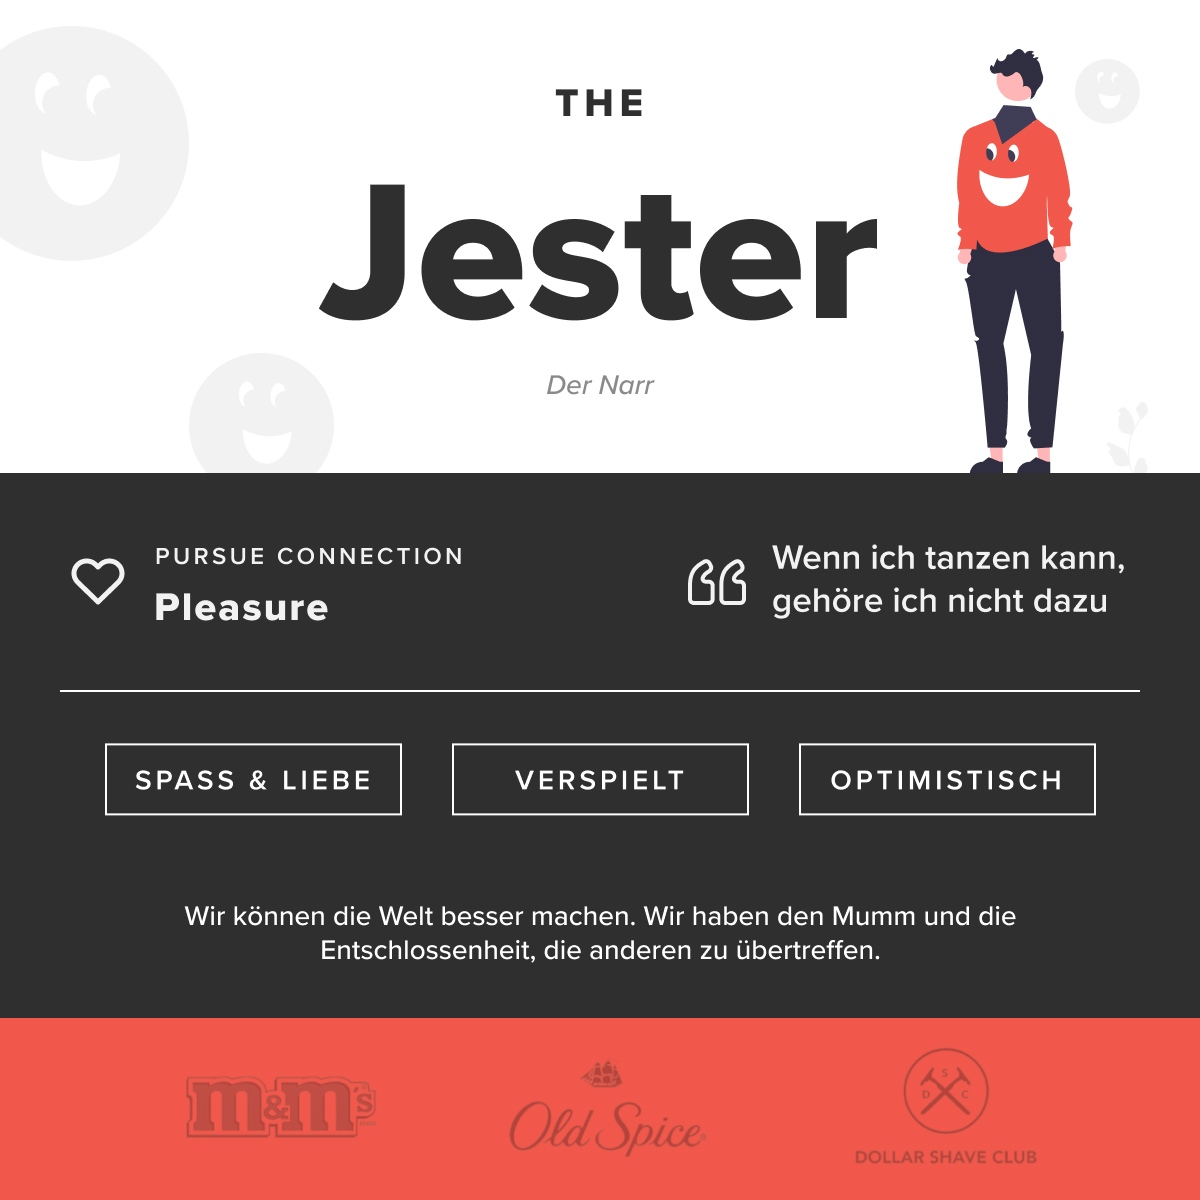 The jester - a website with an image of a man and a woman.